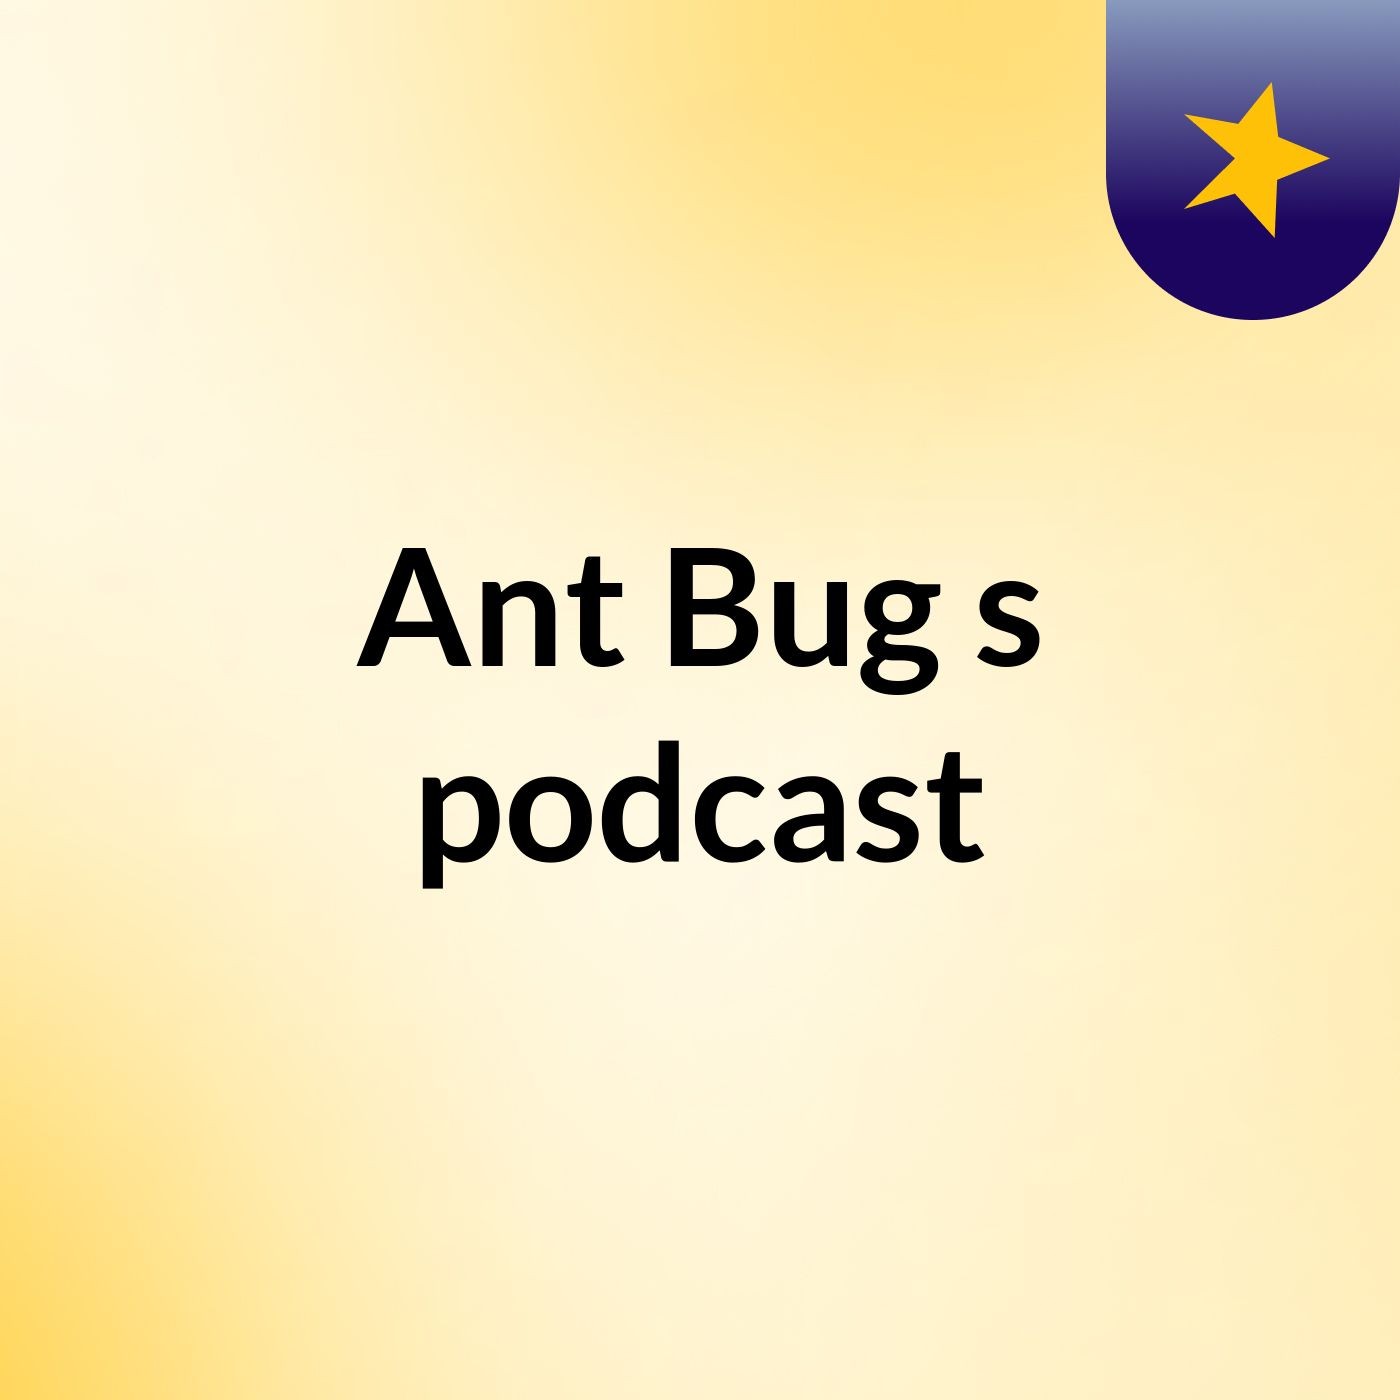 Episode 4 - Ant Bug's podcast